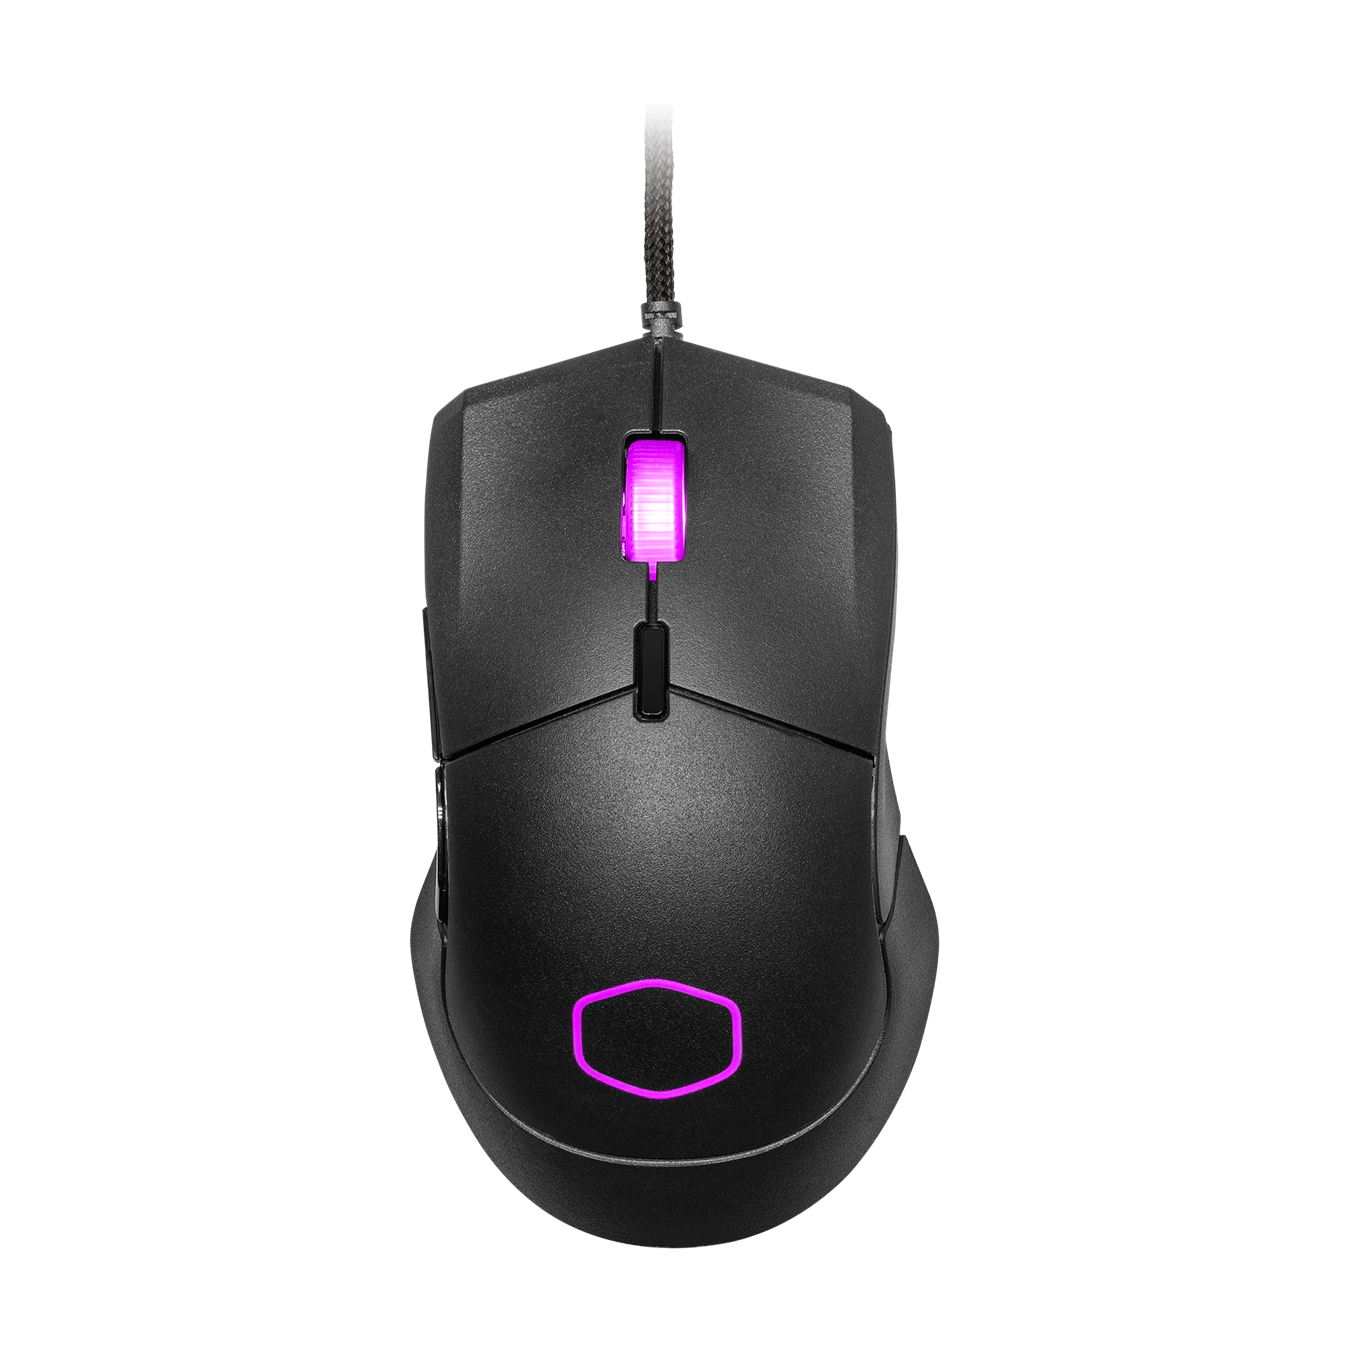 MM310 Gaming Mouse - Adapt to your game or playstyle with optical sensor adjustable up to 12,000 DPI